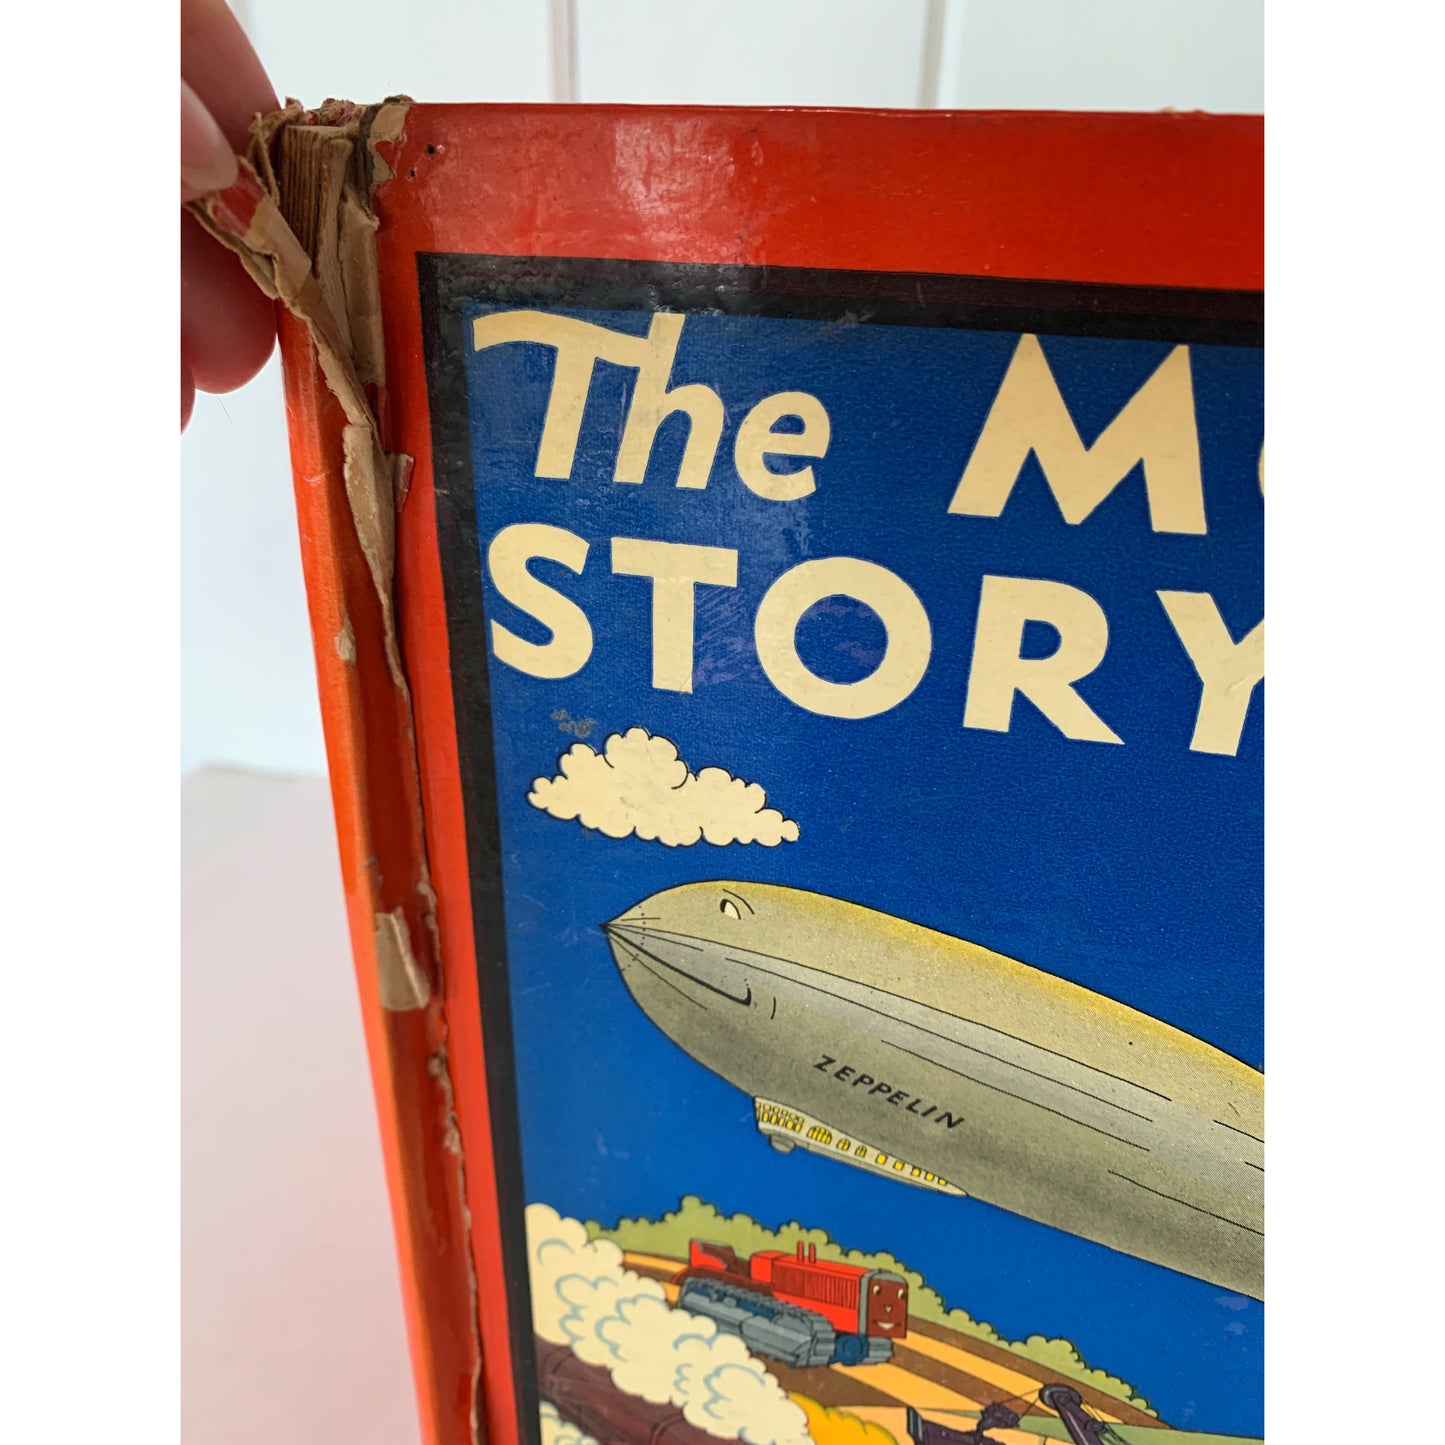 The Modern Storybook, Illustrated Oversized 1947 Hardcover Children's Book